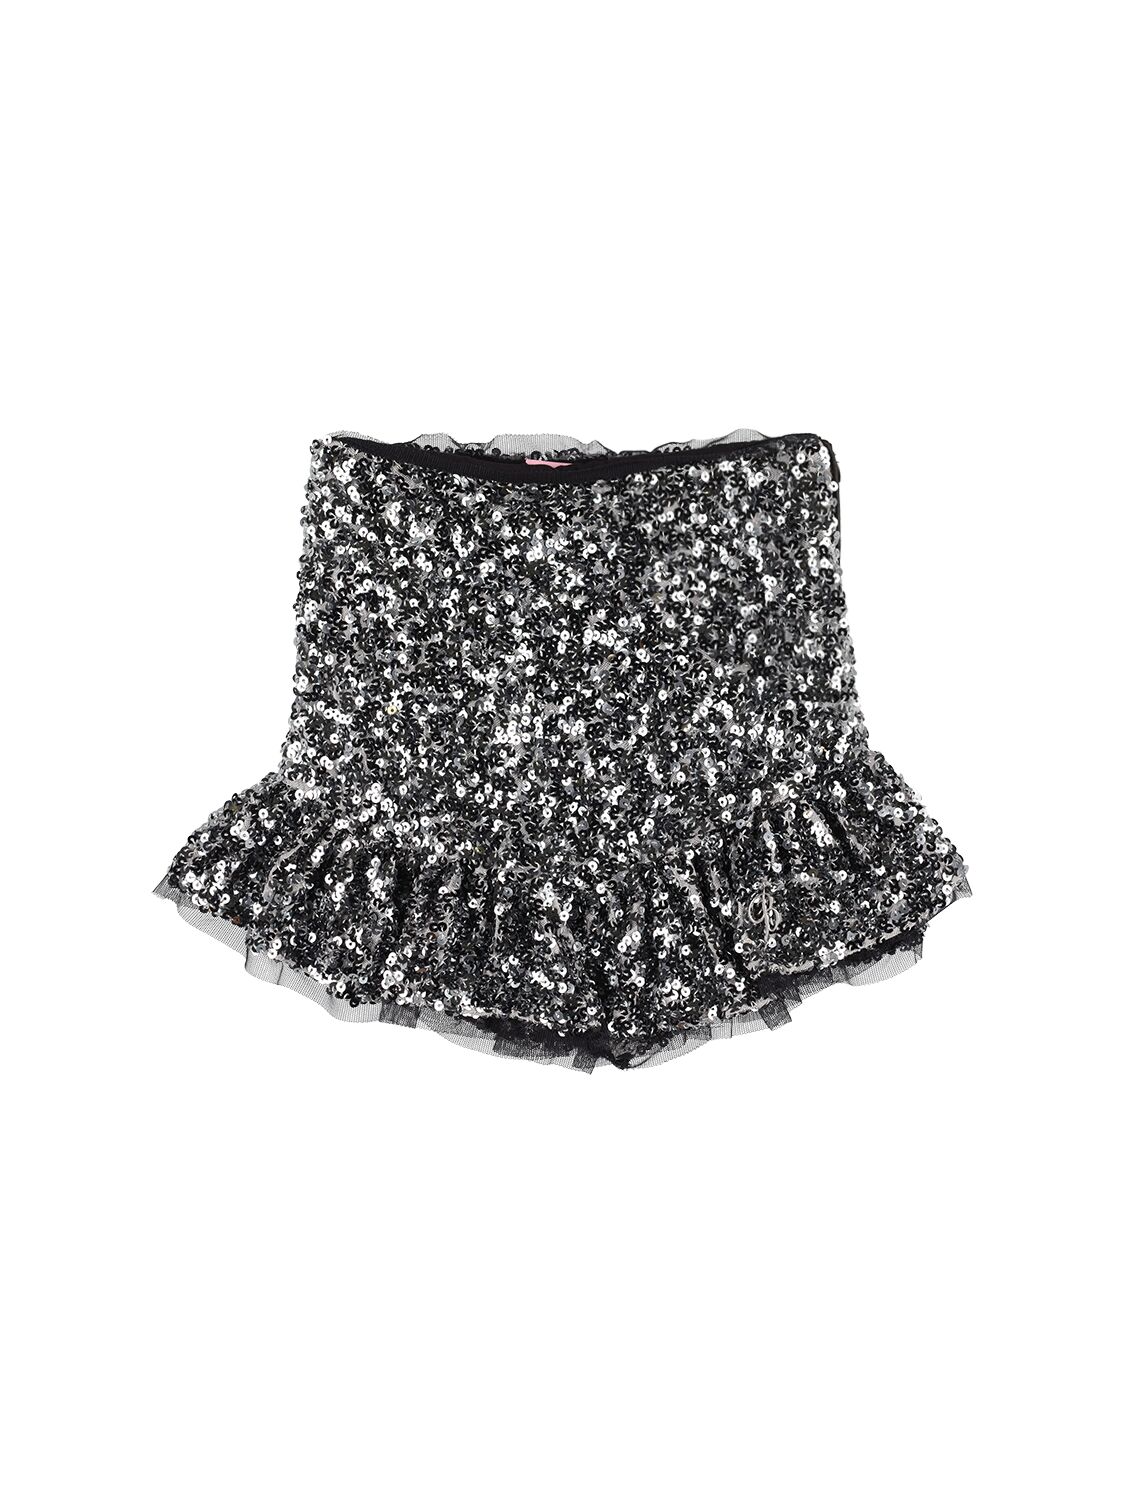 Image of Sequined Skirt